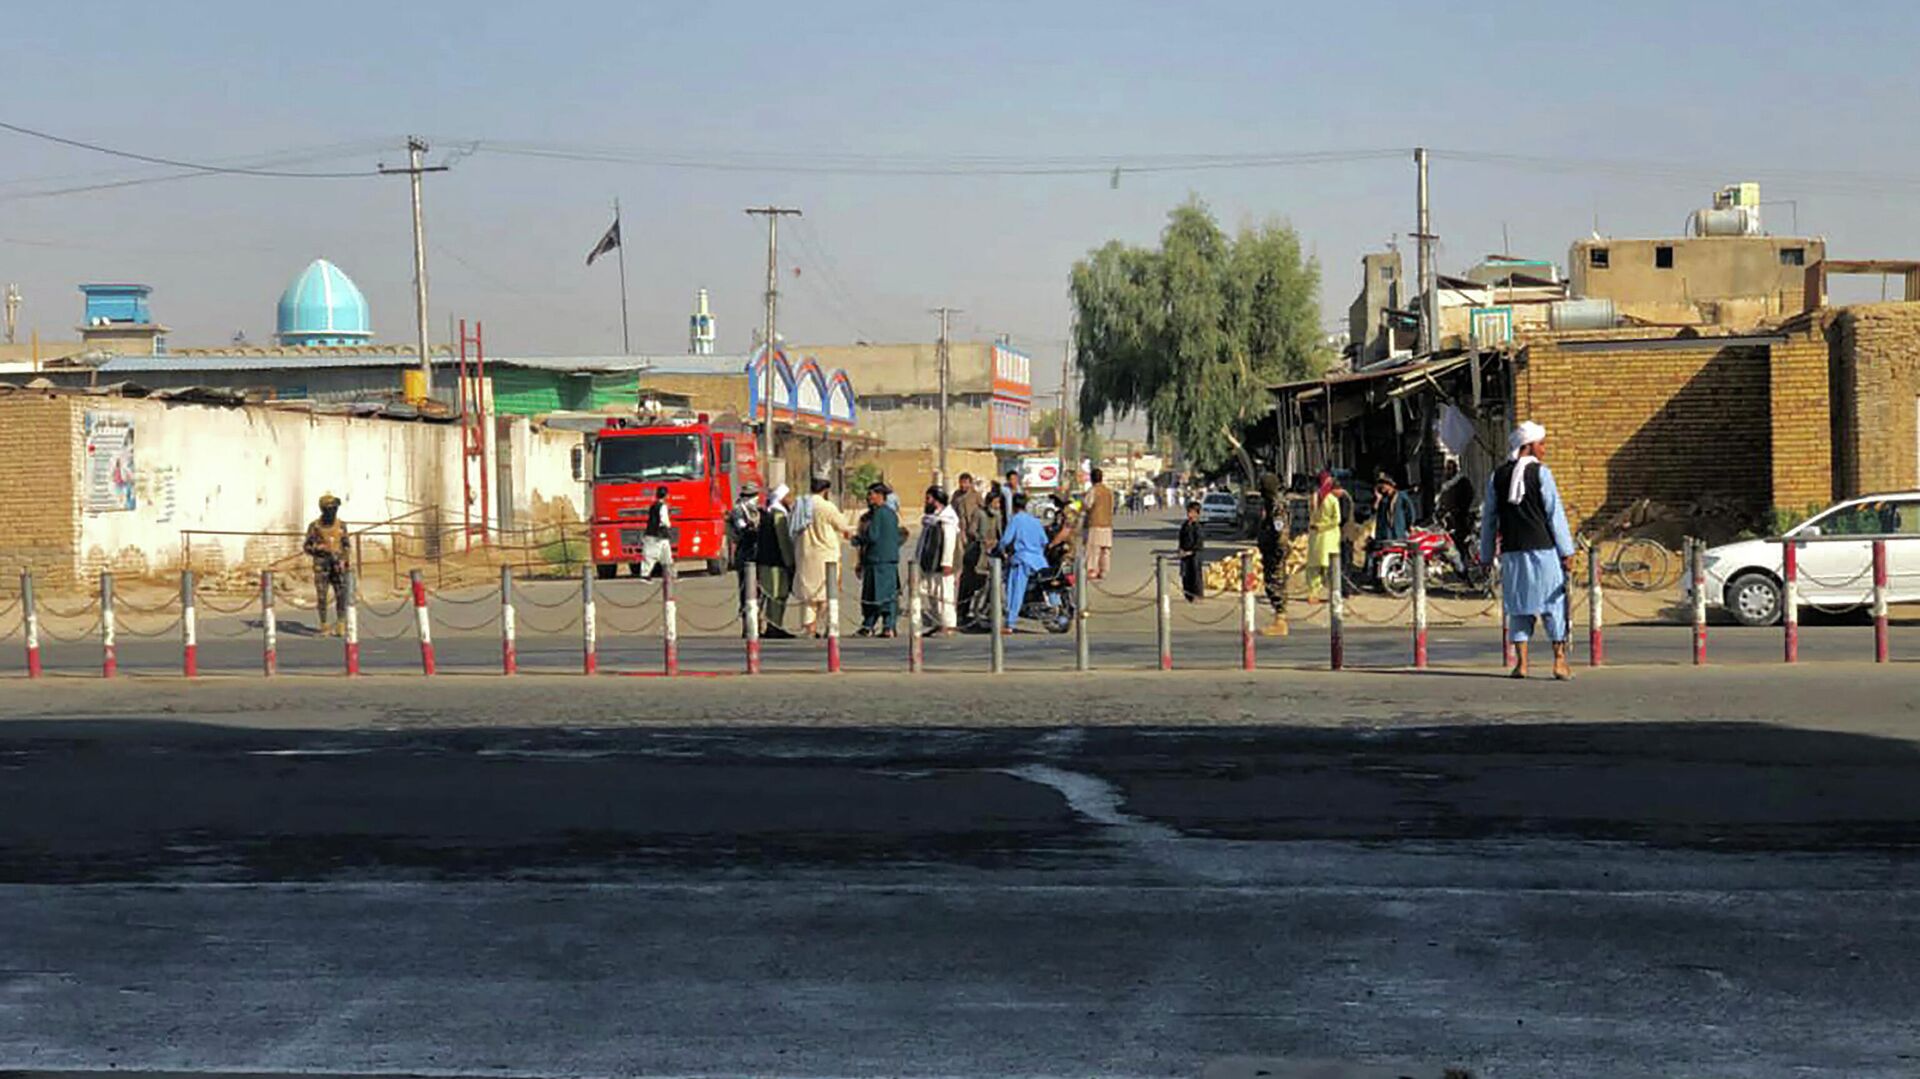 Members of Taliban stand guard near a Shiite mosque in Kandahar province on October 15, 2021, after at least 16 people were killed and 32 wounded when explosions hit a Shiite mosque - Sputnik International, 1920, 16.10.2021